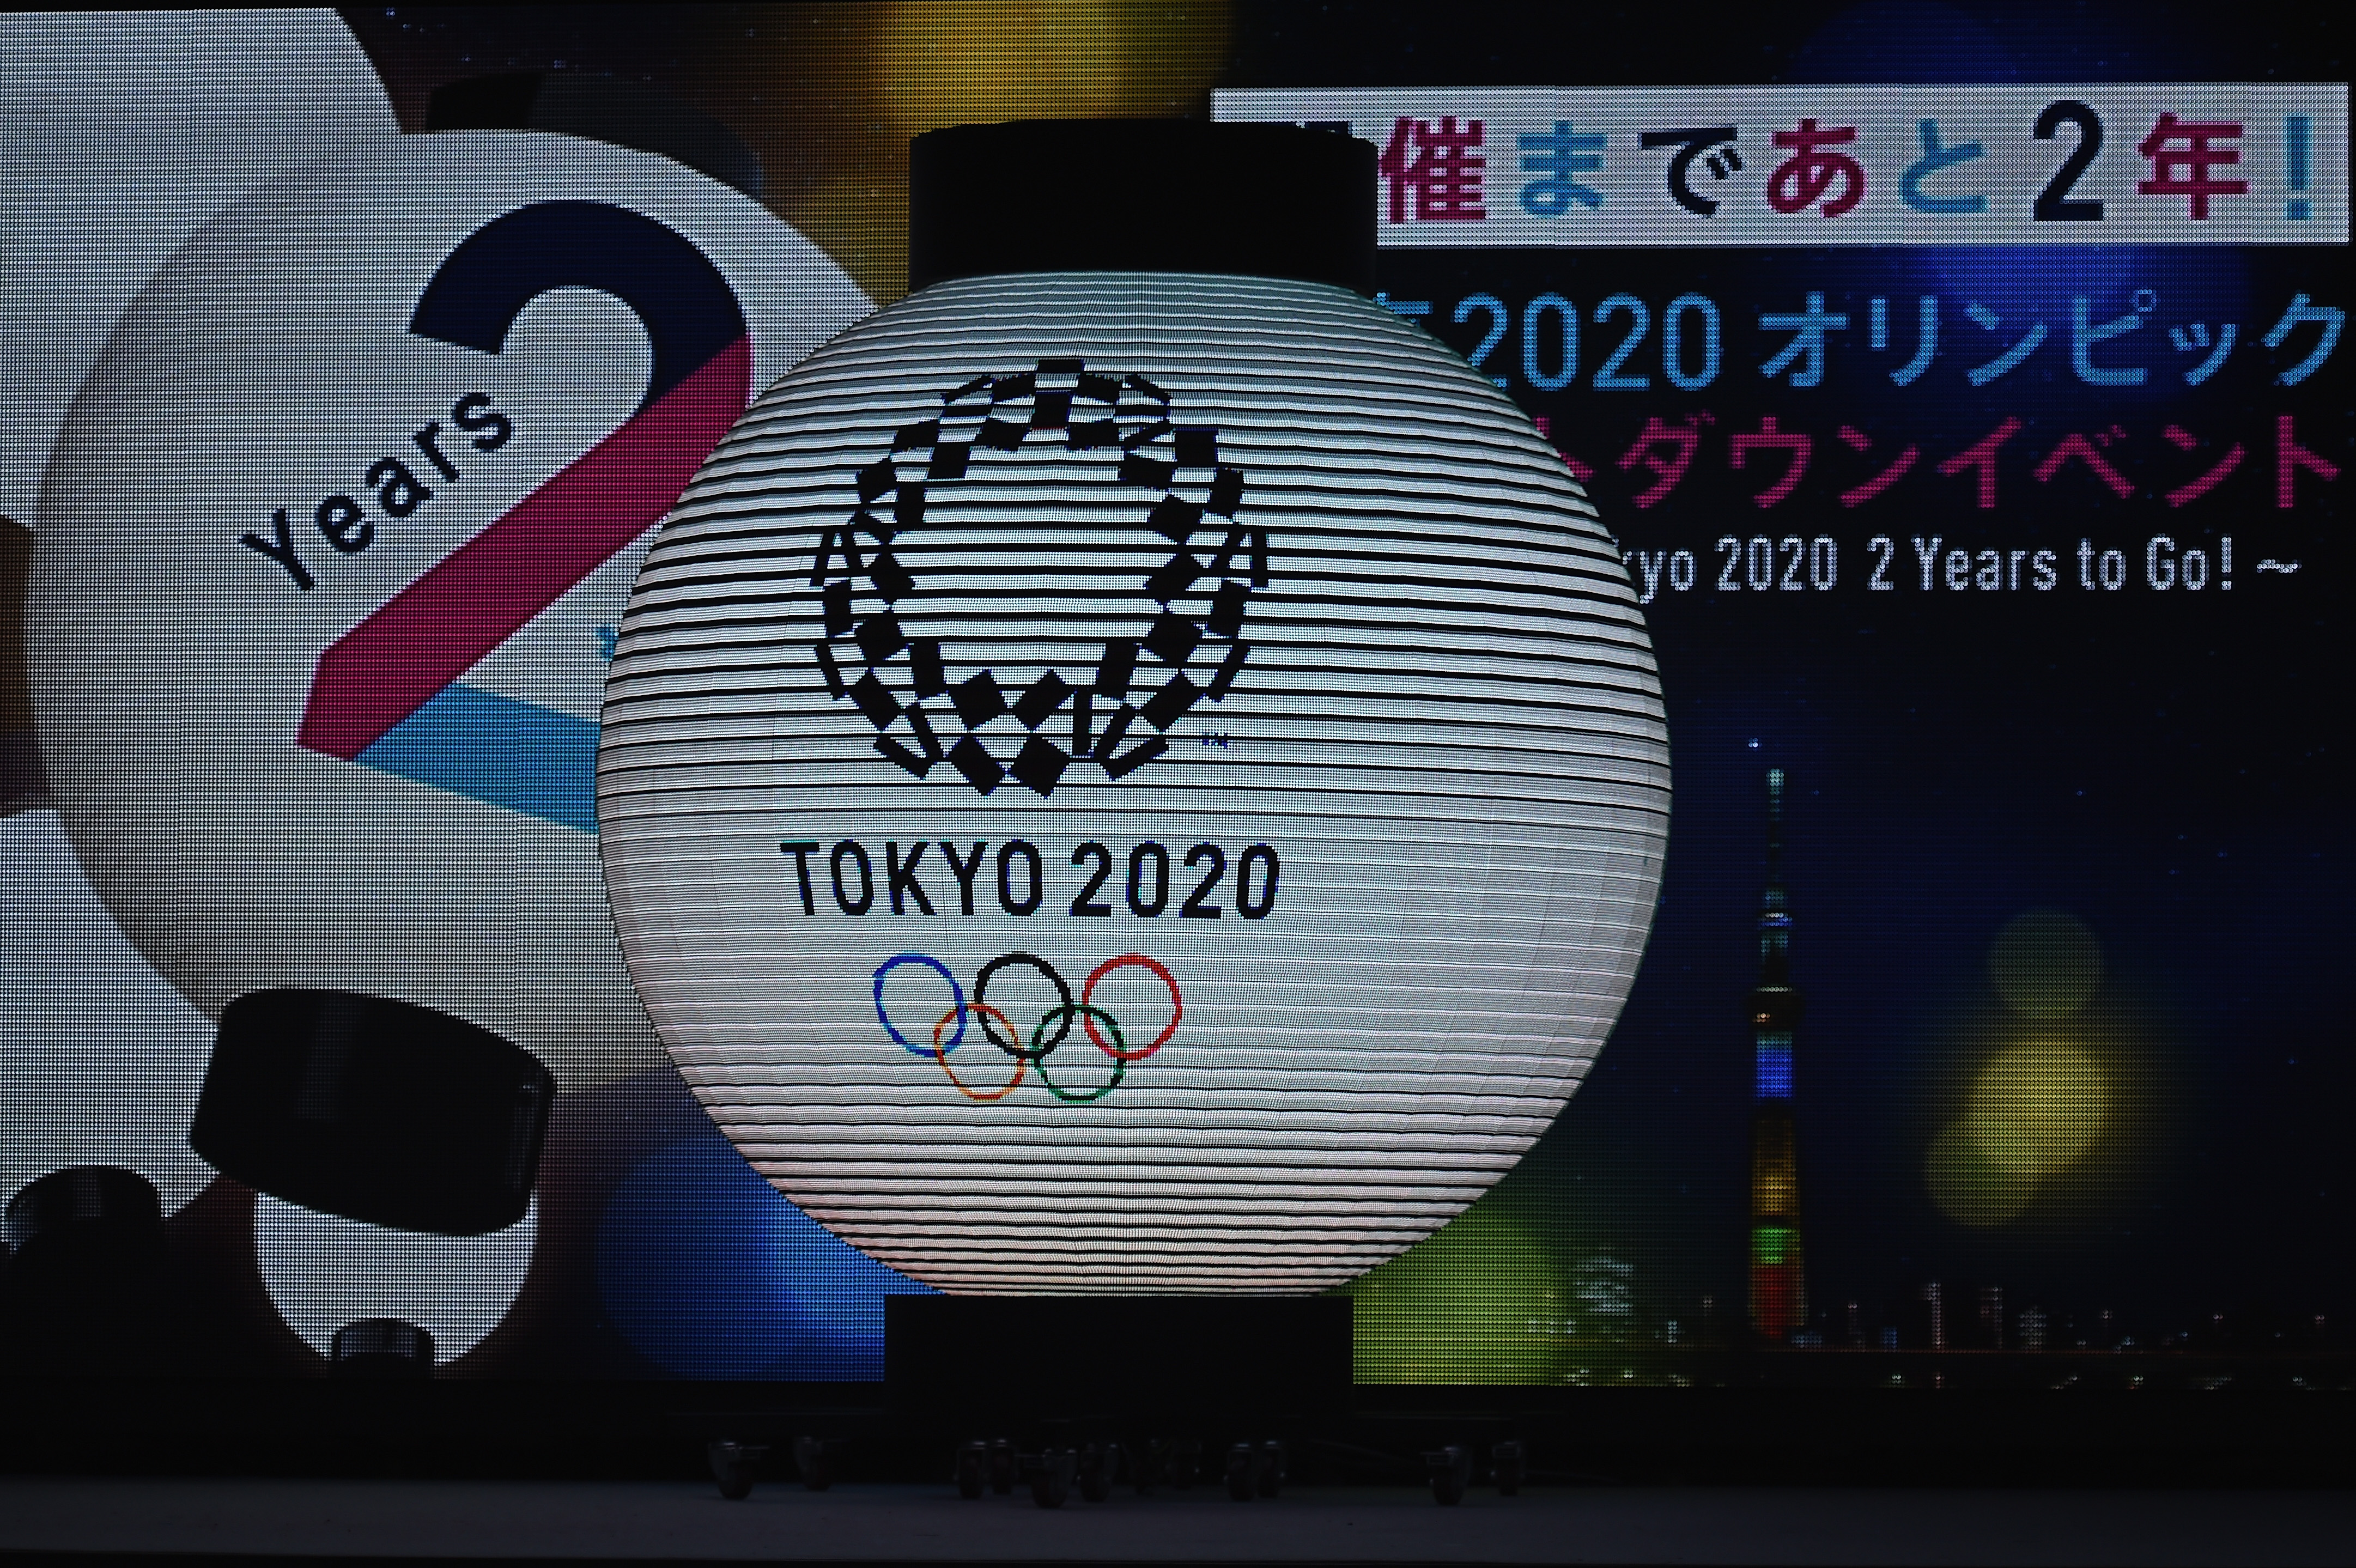 Tokyo Olympics to kick off on July 23 next year